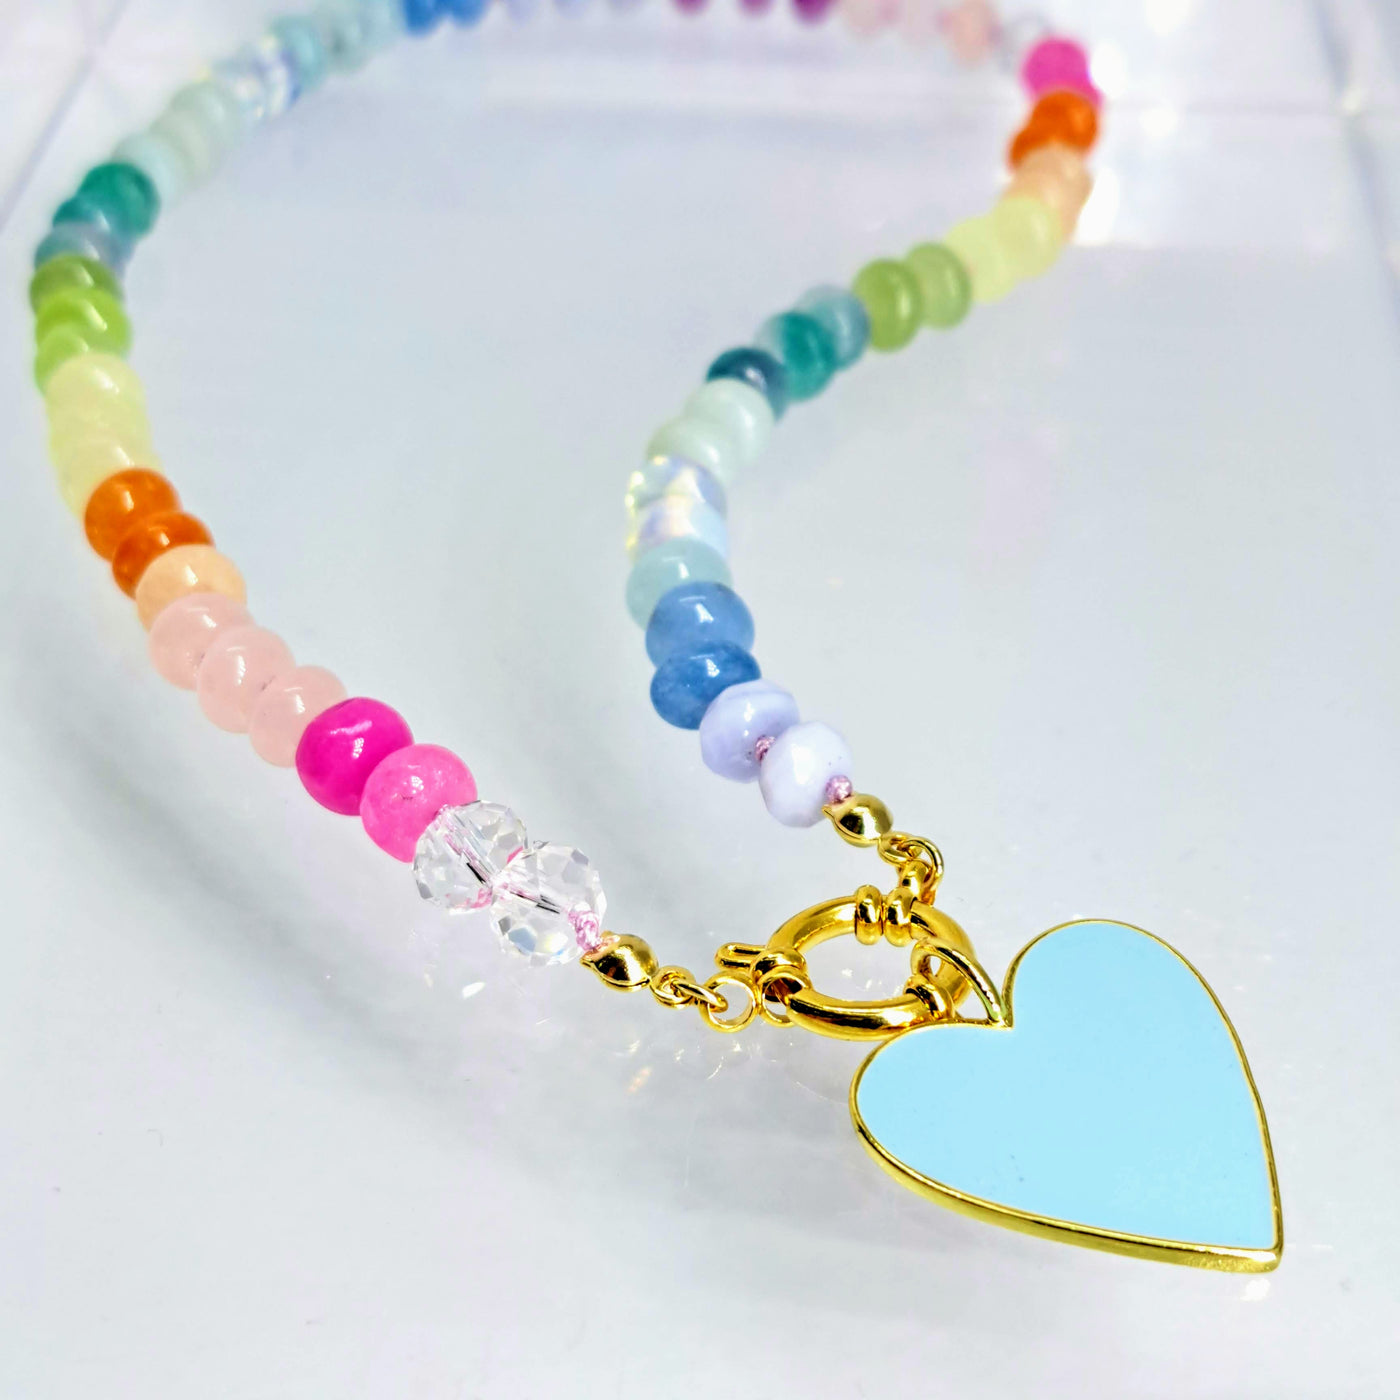 "Rainbow LOVE!" 16" Necklaces - Mixed Gemstones, Gold Filled Charm Catcher Clasp, Enamel Charm